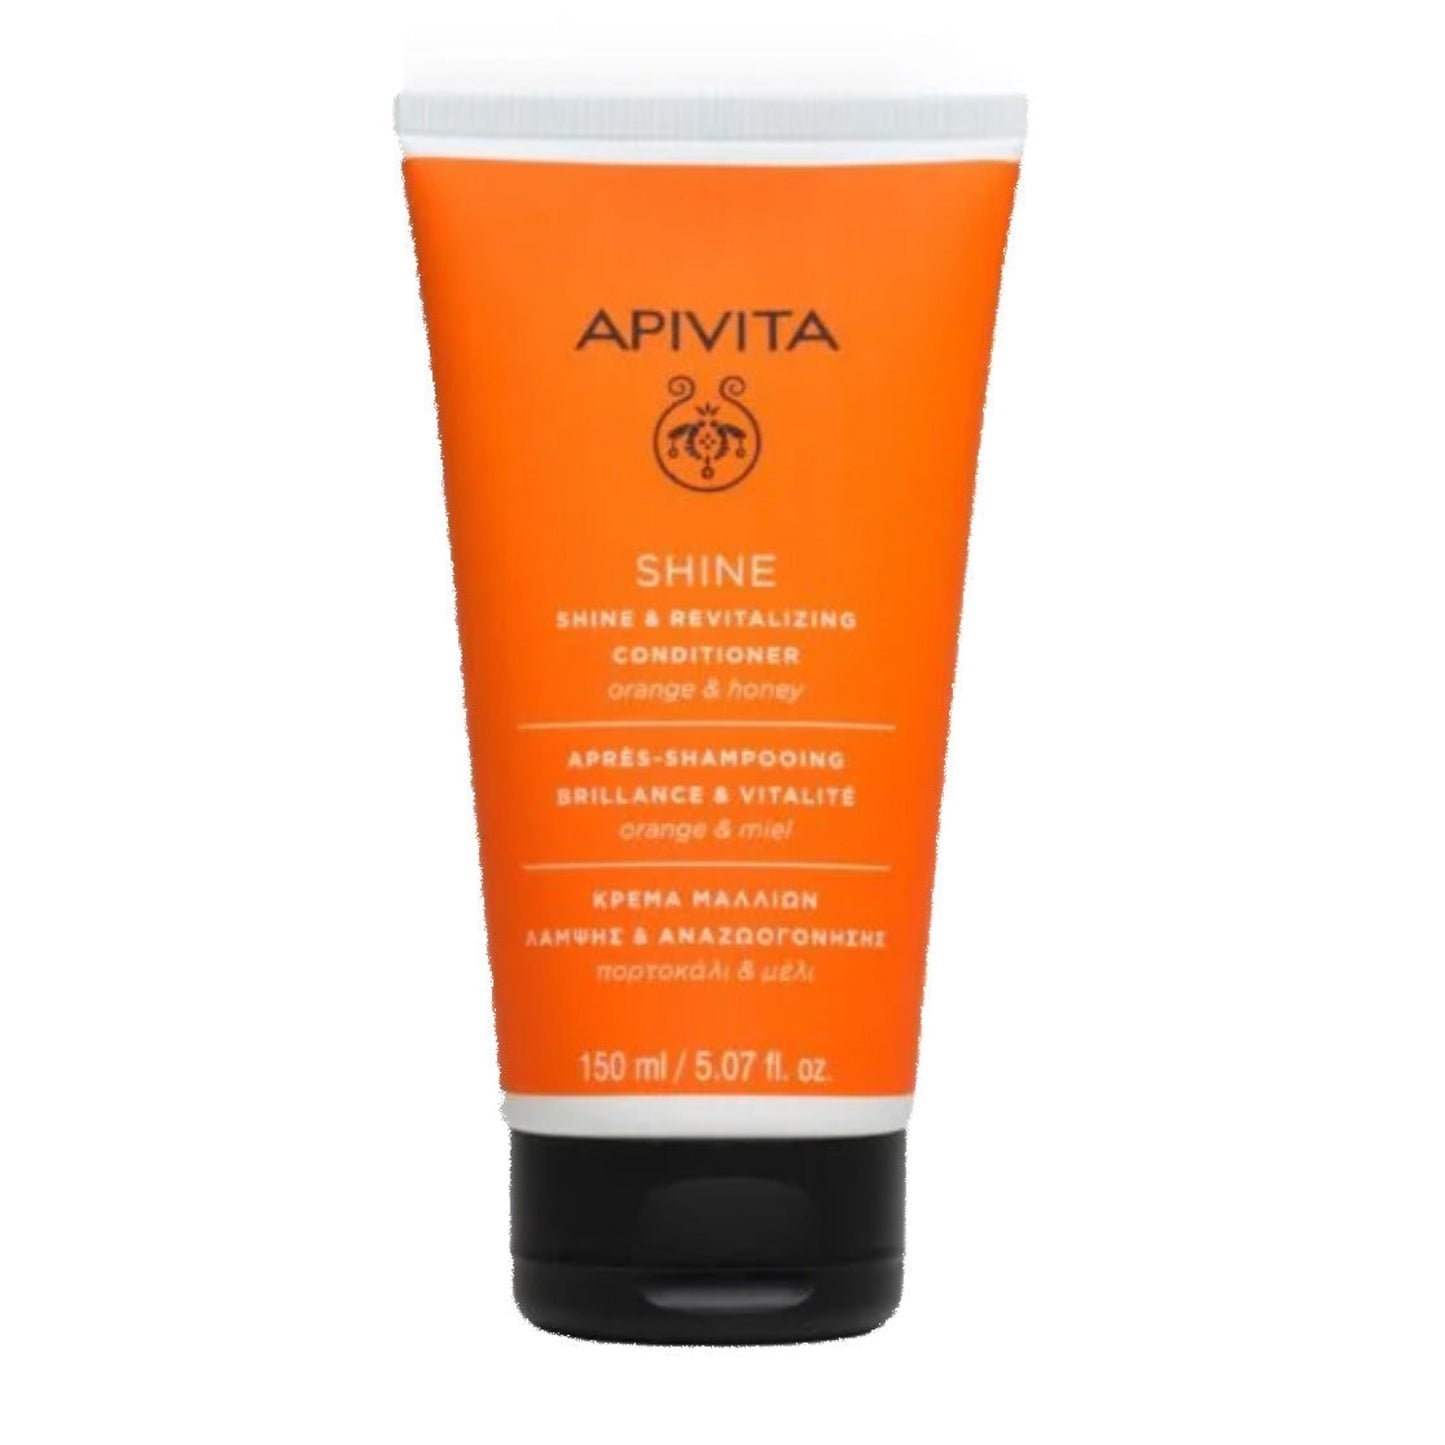 Apivita Shine & Revitalising Hair Conditioner with natural ingredients including vitamins, orange, lemon and grapefruit essential oils, mountain tea extract and the APISHIELD HS complex, plus organic olive oil and Greek thyme honey, help prevent breakage and split ends while protecting from external stressors such as air pollution.